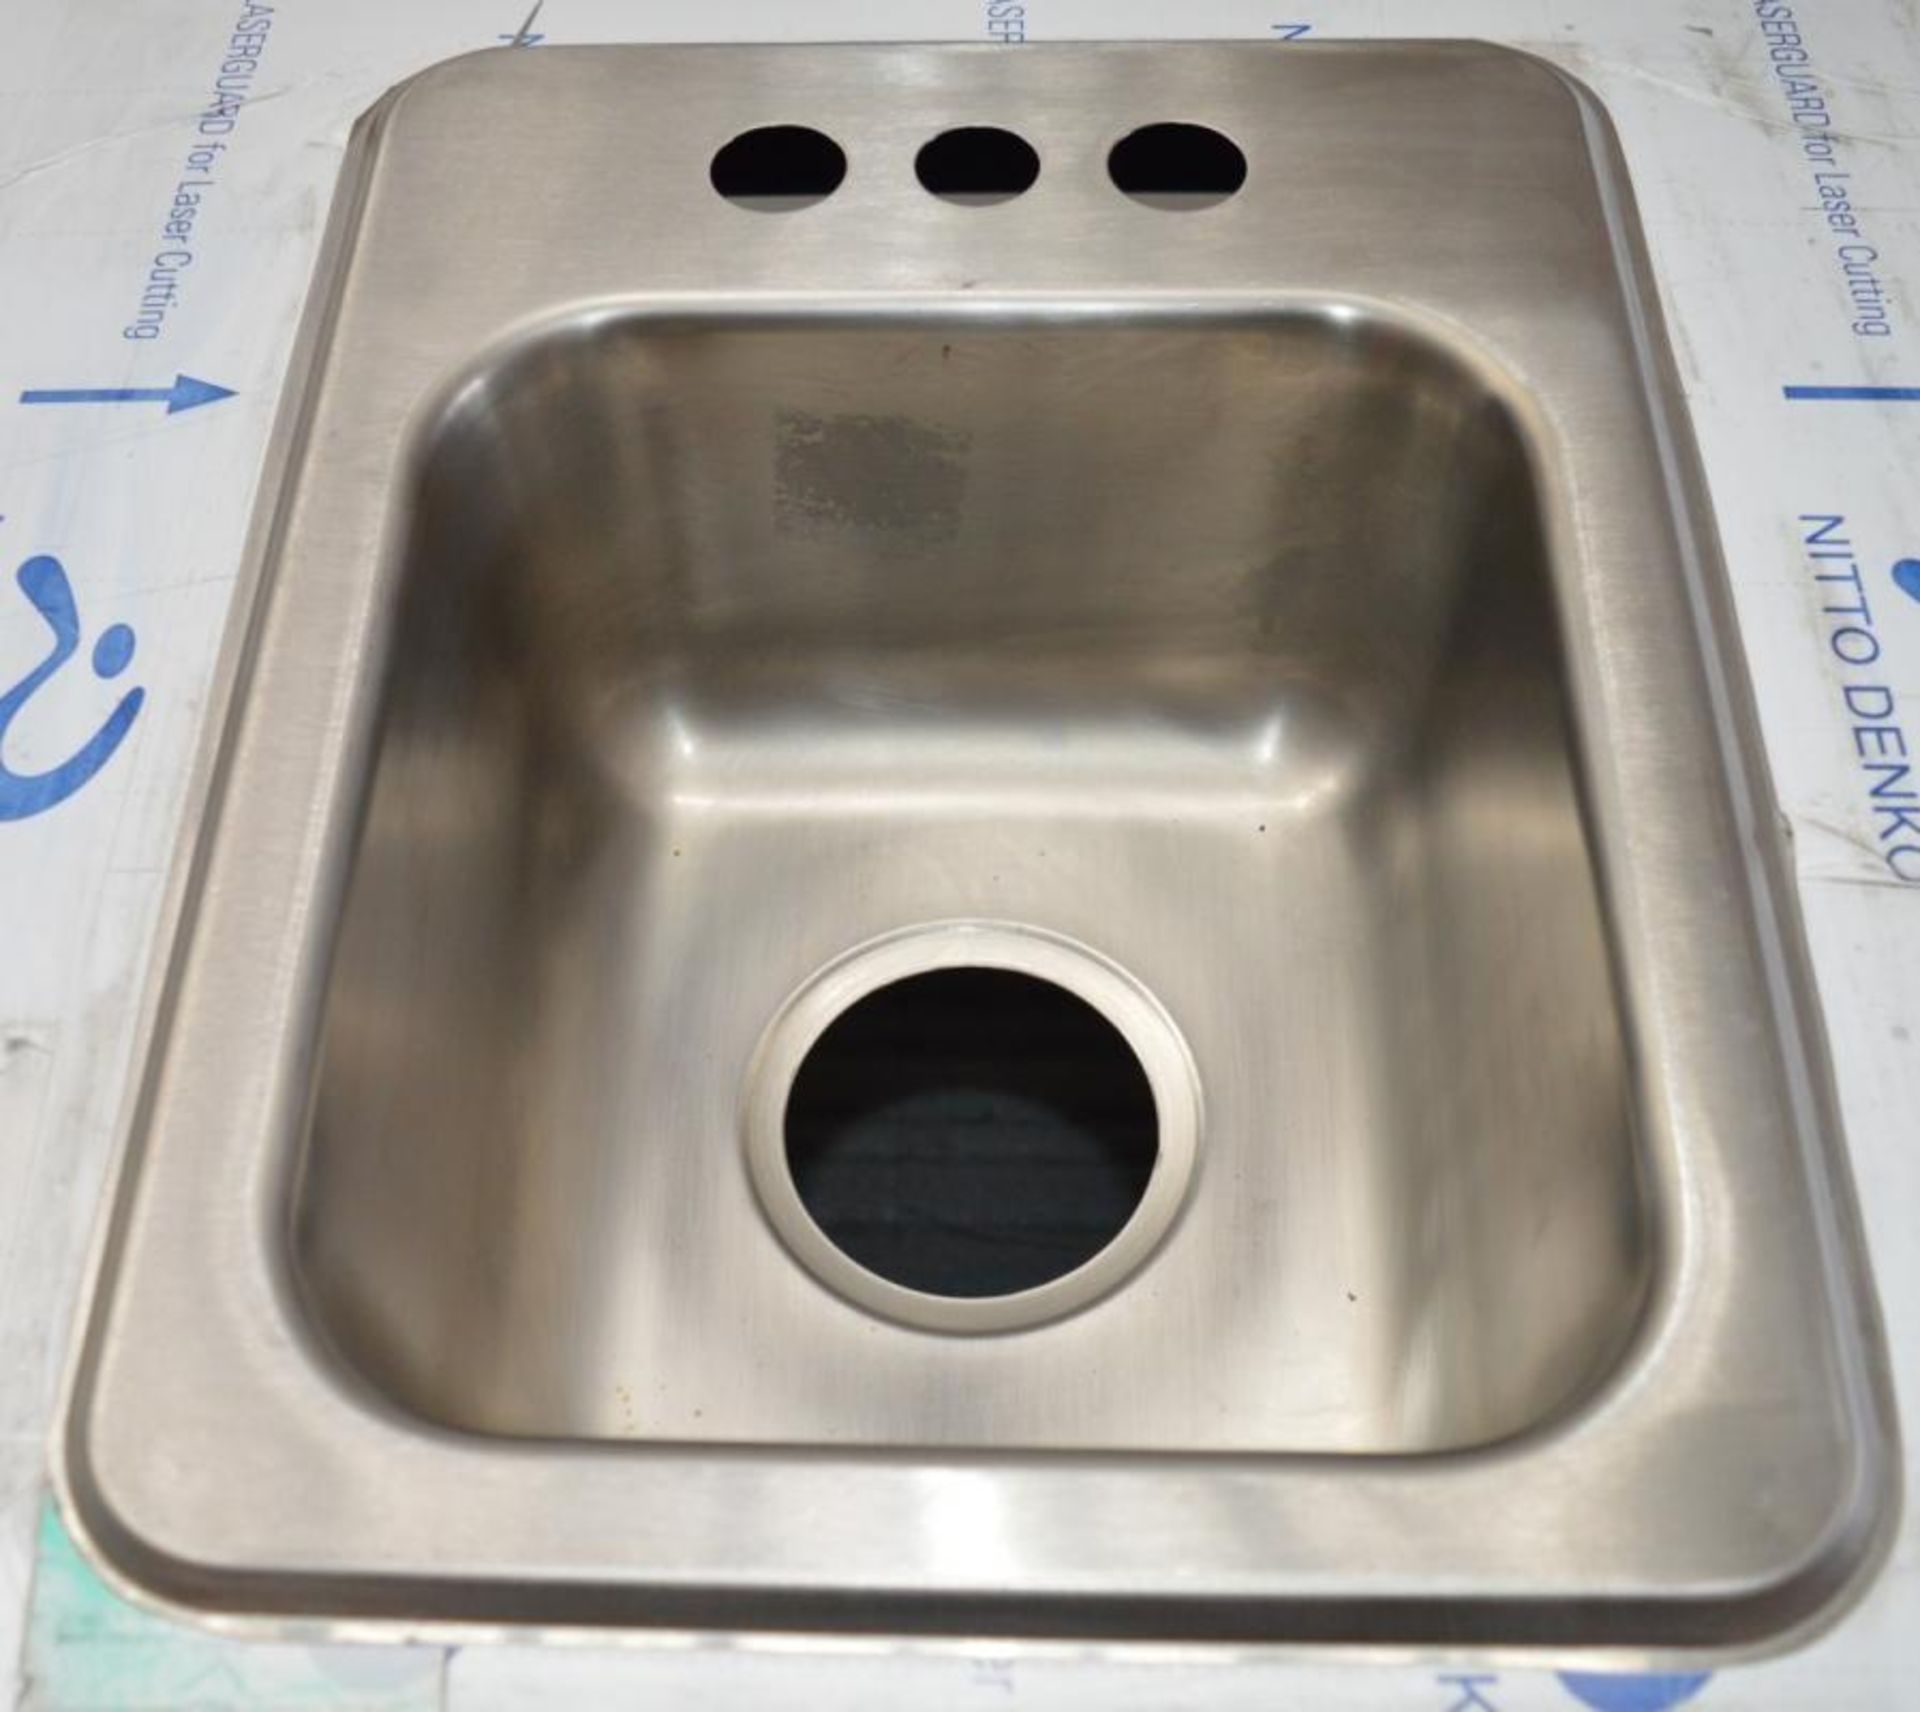 1 x Duke Stainless Steel Sink Basin Unit With Wood Finish Cabinet - Unused With Protective Film Atta - Image 2 of 7